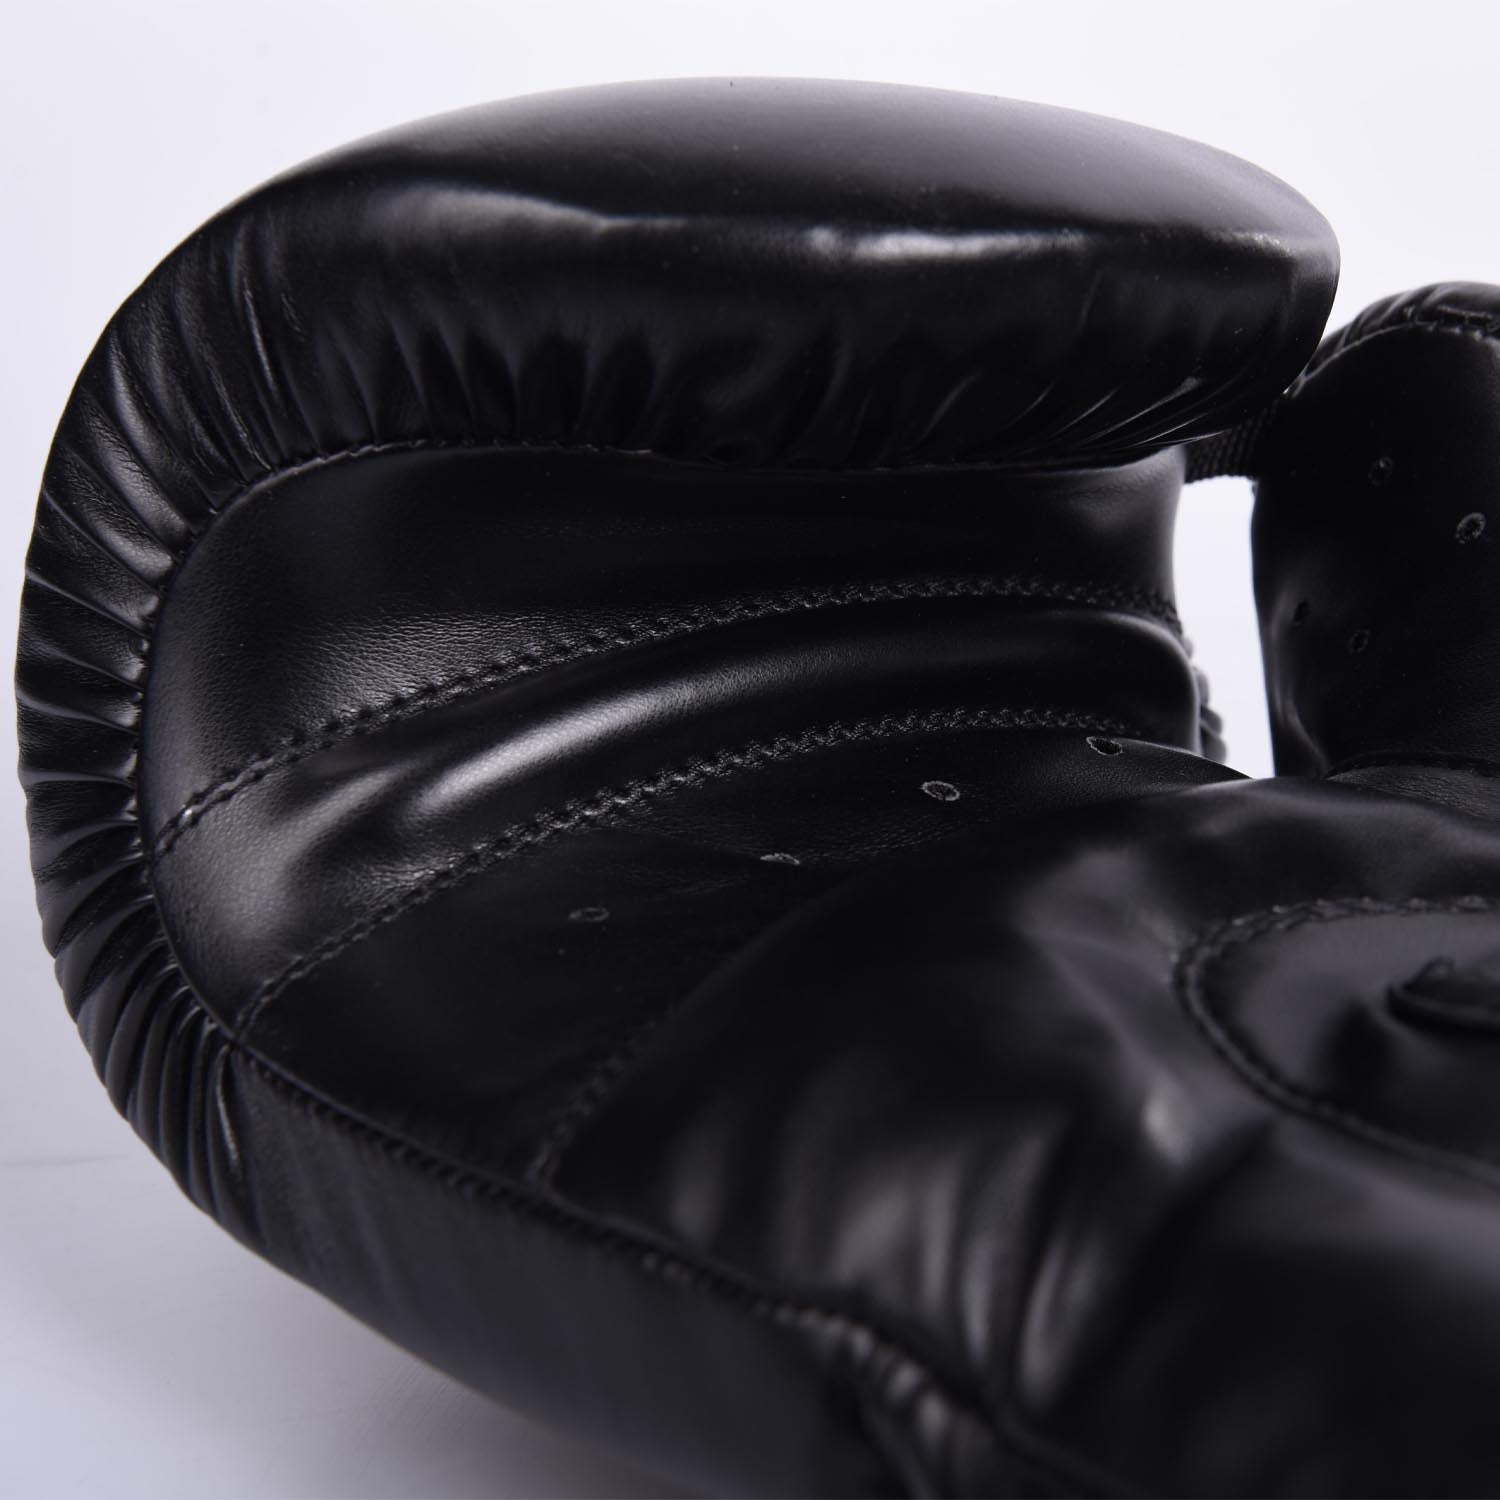 8 WEAPONS Boxing Gloves, Unlimited, black-black 8 WEAPONS